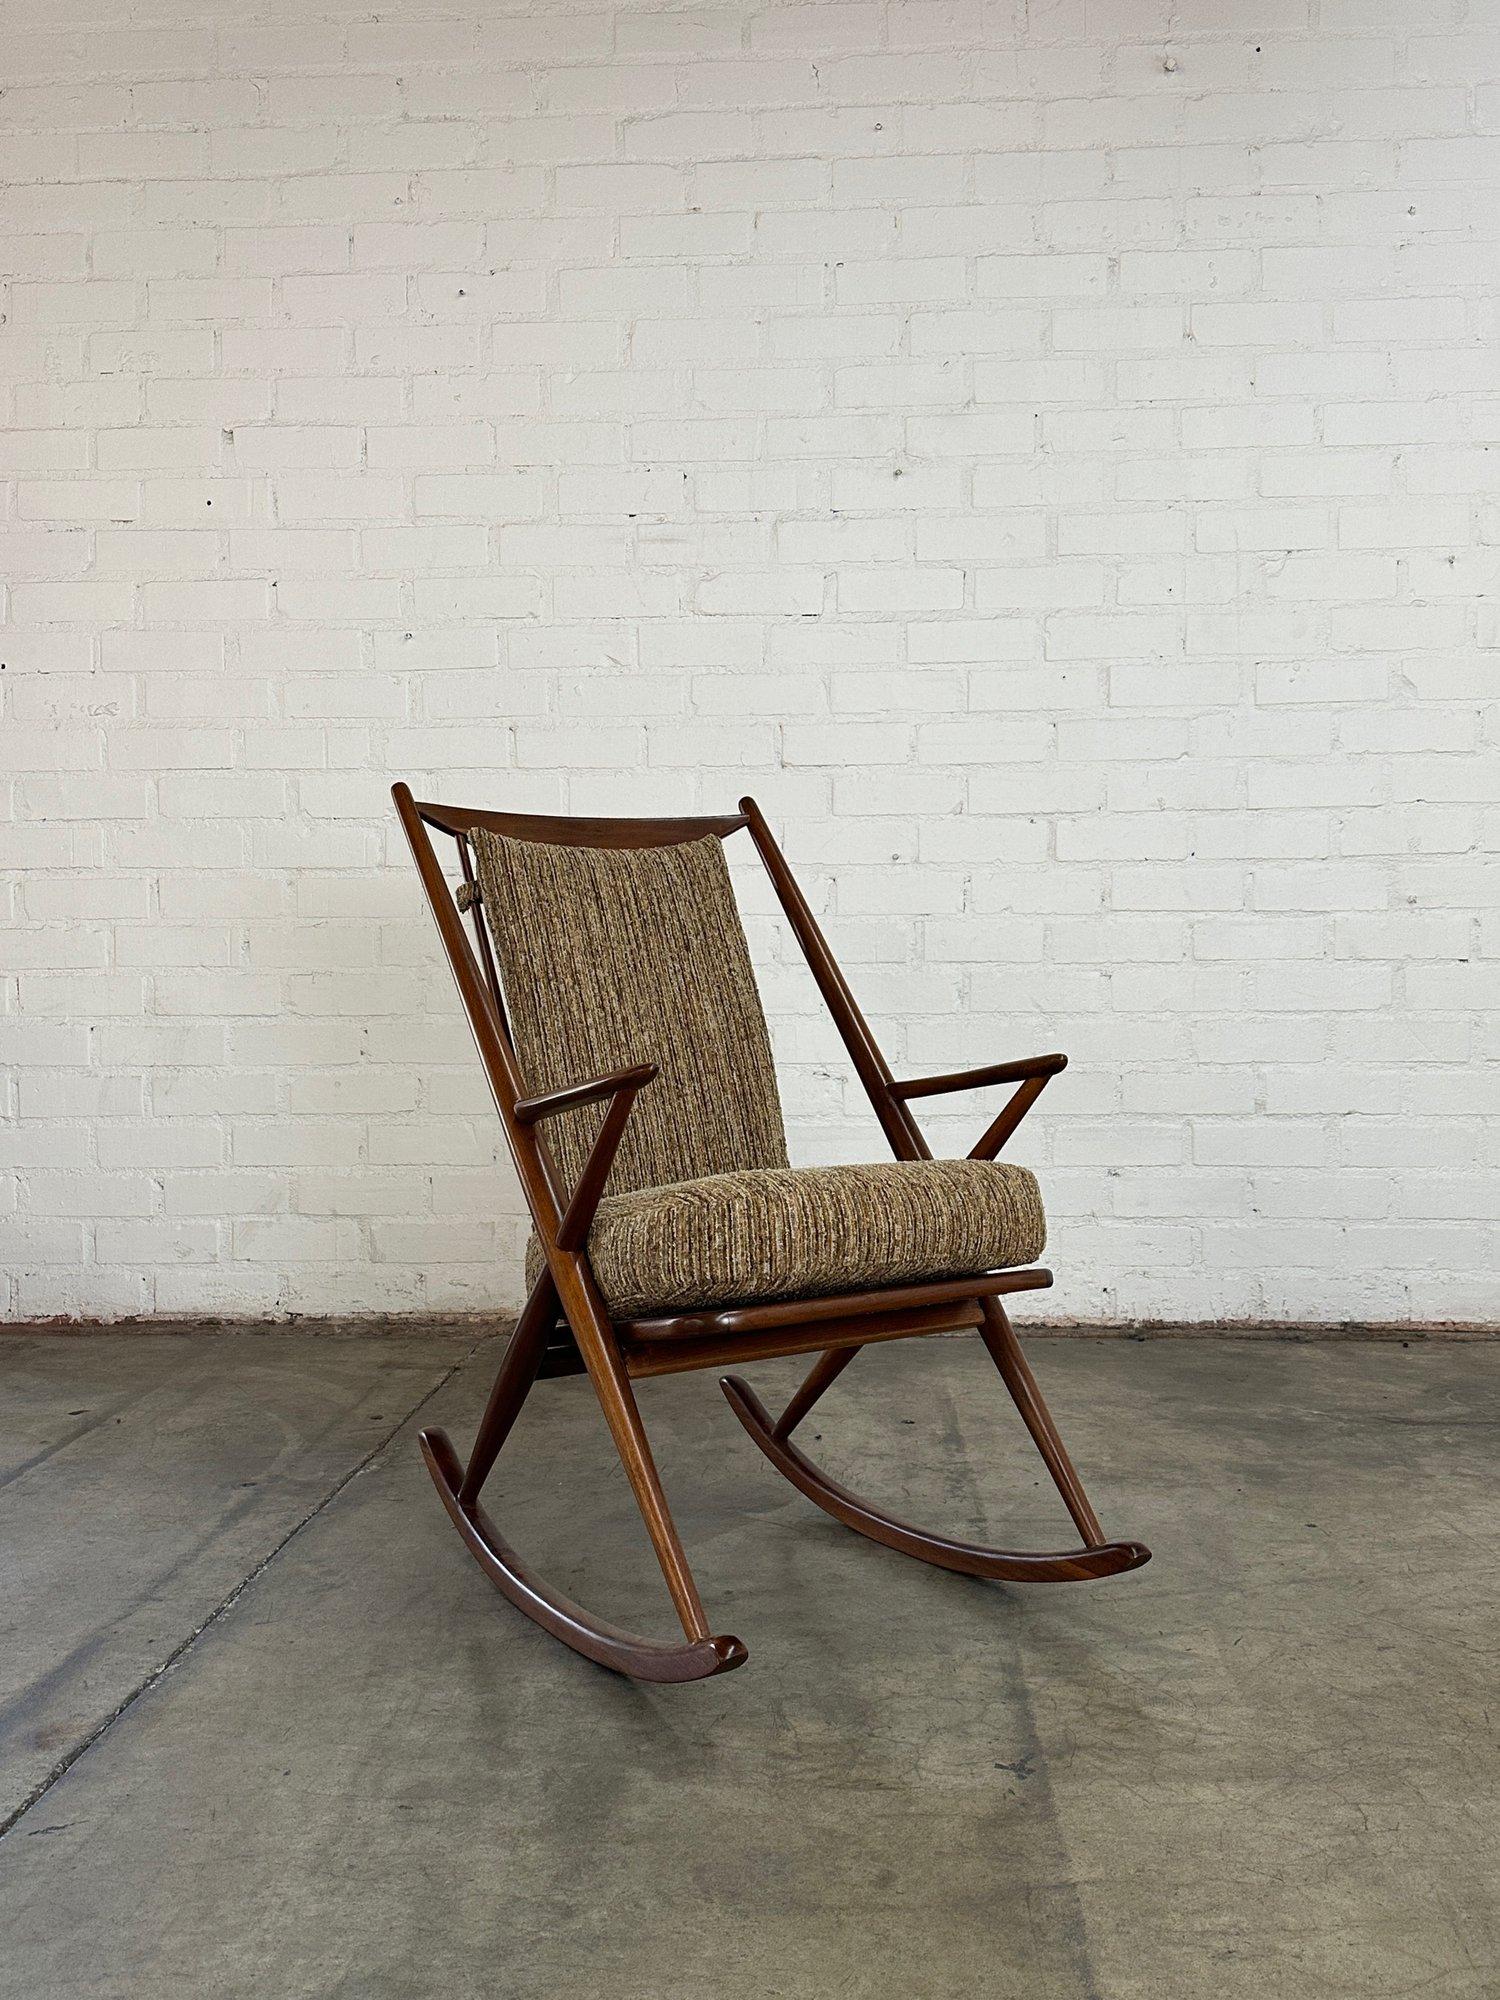 W24 D31 H39 SW119 SD18.5 SH21 AH24

Vintage rocking chair in fully restored condition. Item features new soft textured fabric and new foam. Walnut frame is structurally sound and sturdy with no visible breaks. 